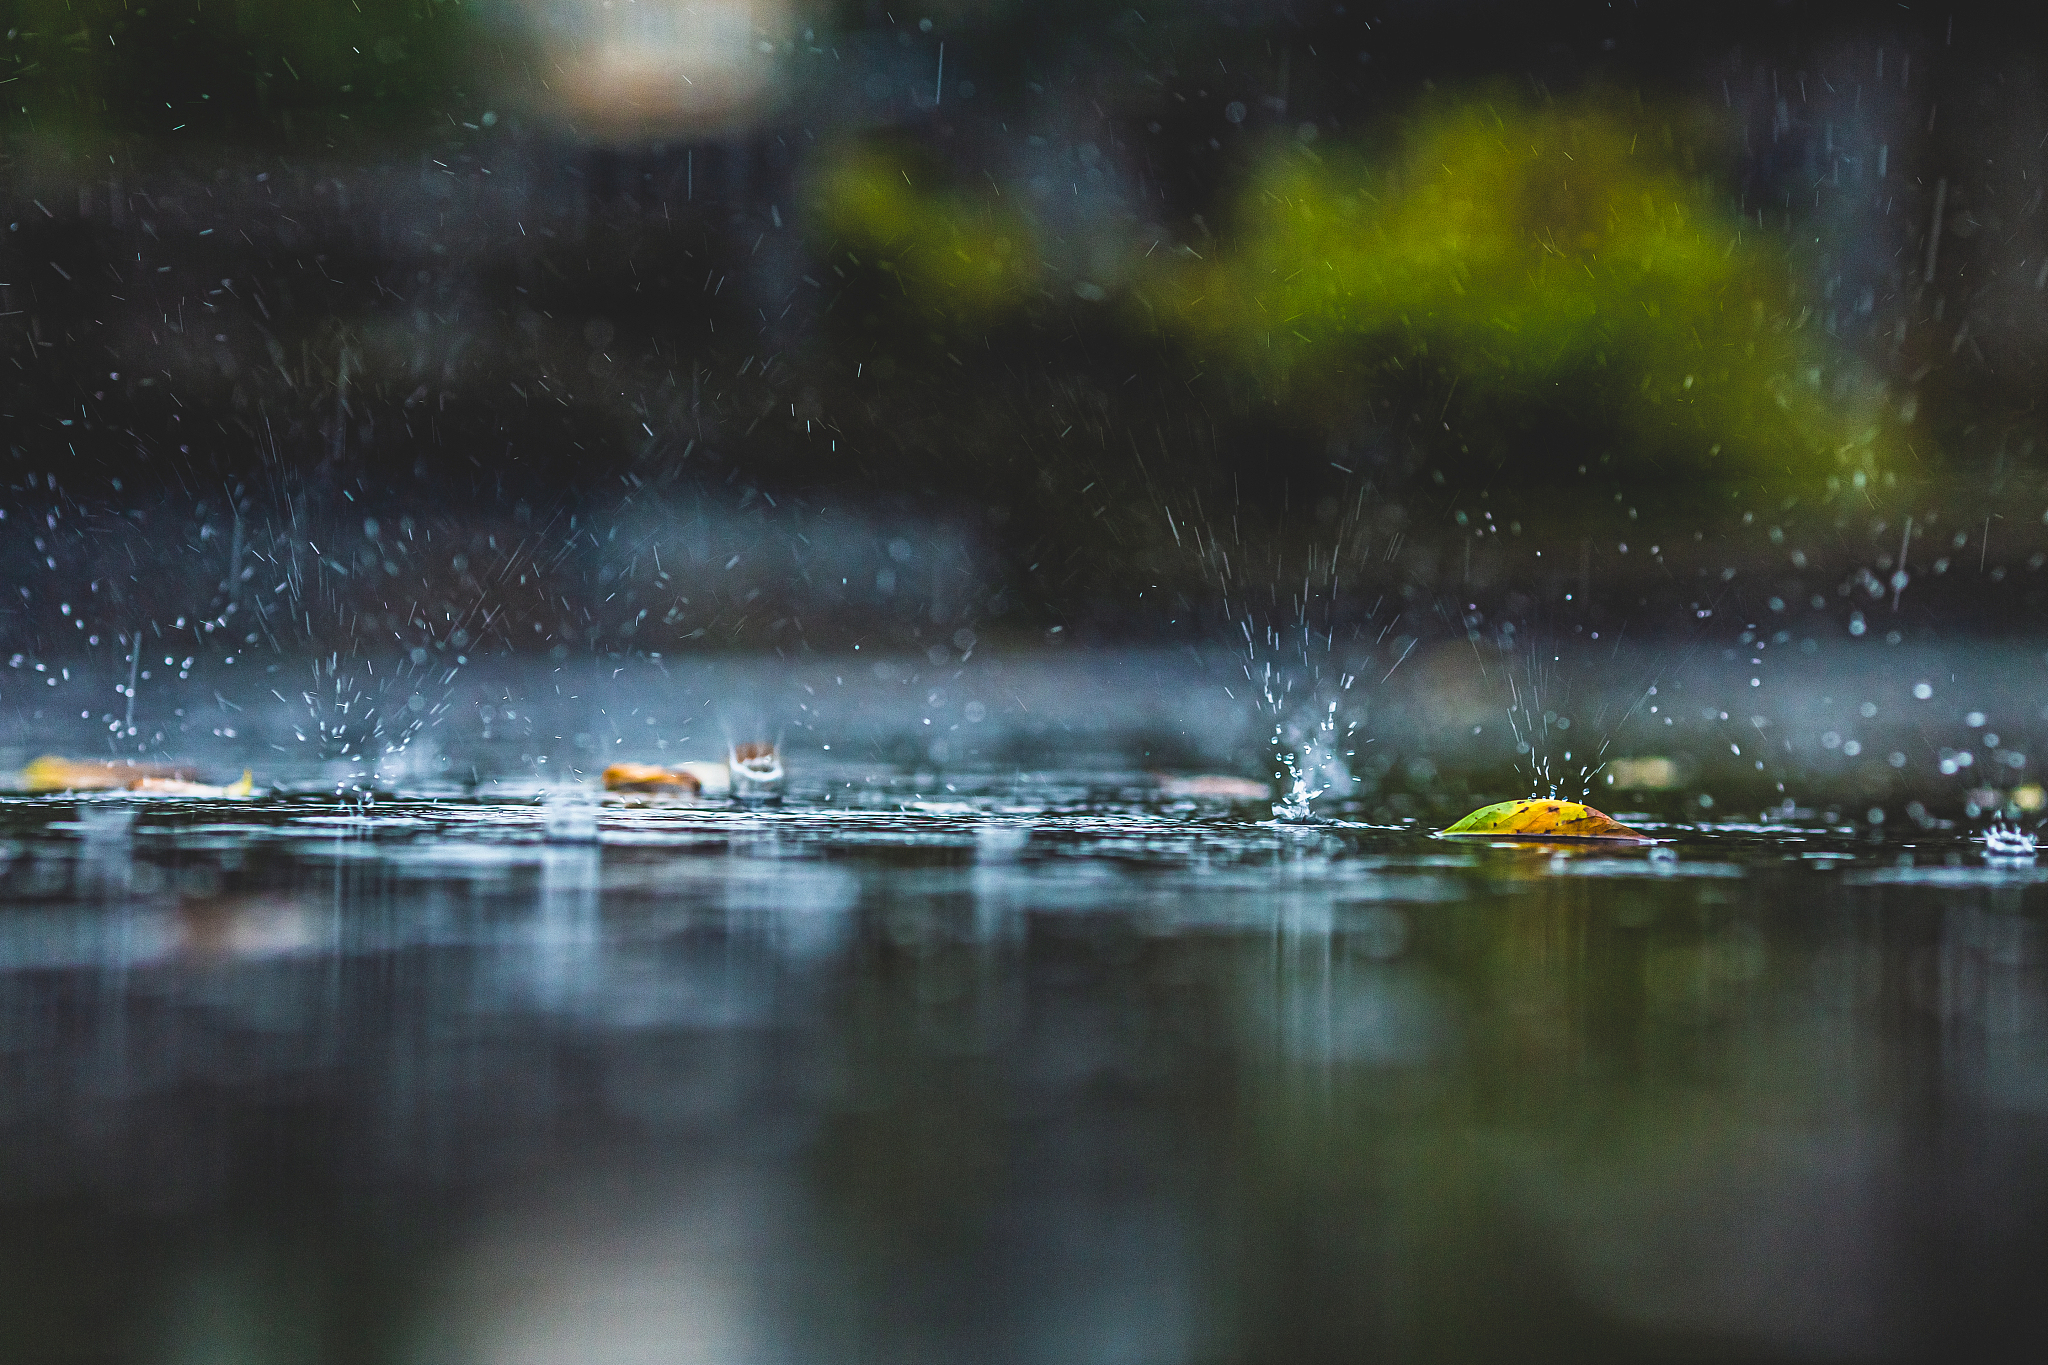 By analyzing a wide range of observational data, the researchers found that rainfall variability has since the 1900s increased in about 75 percent of the land areas studied, particularly in Europe, Australia and the eastern part of North America. /CFP